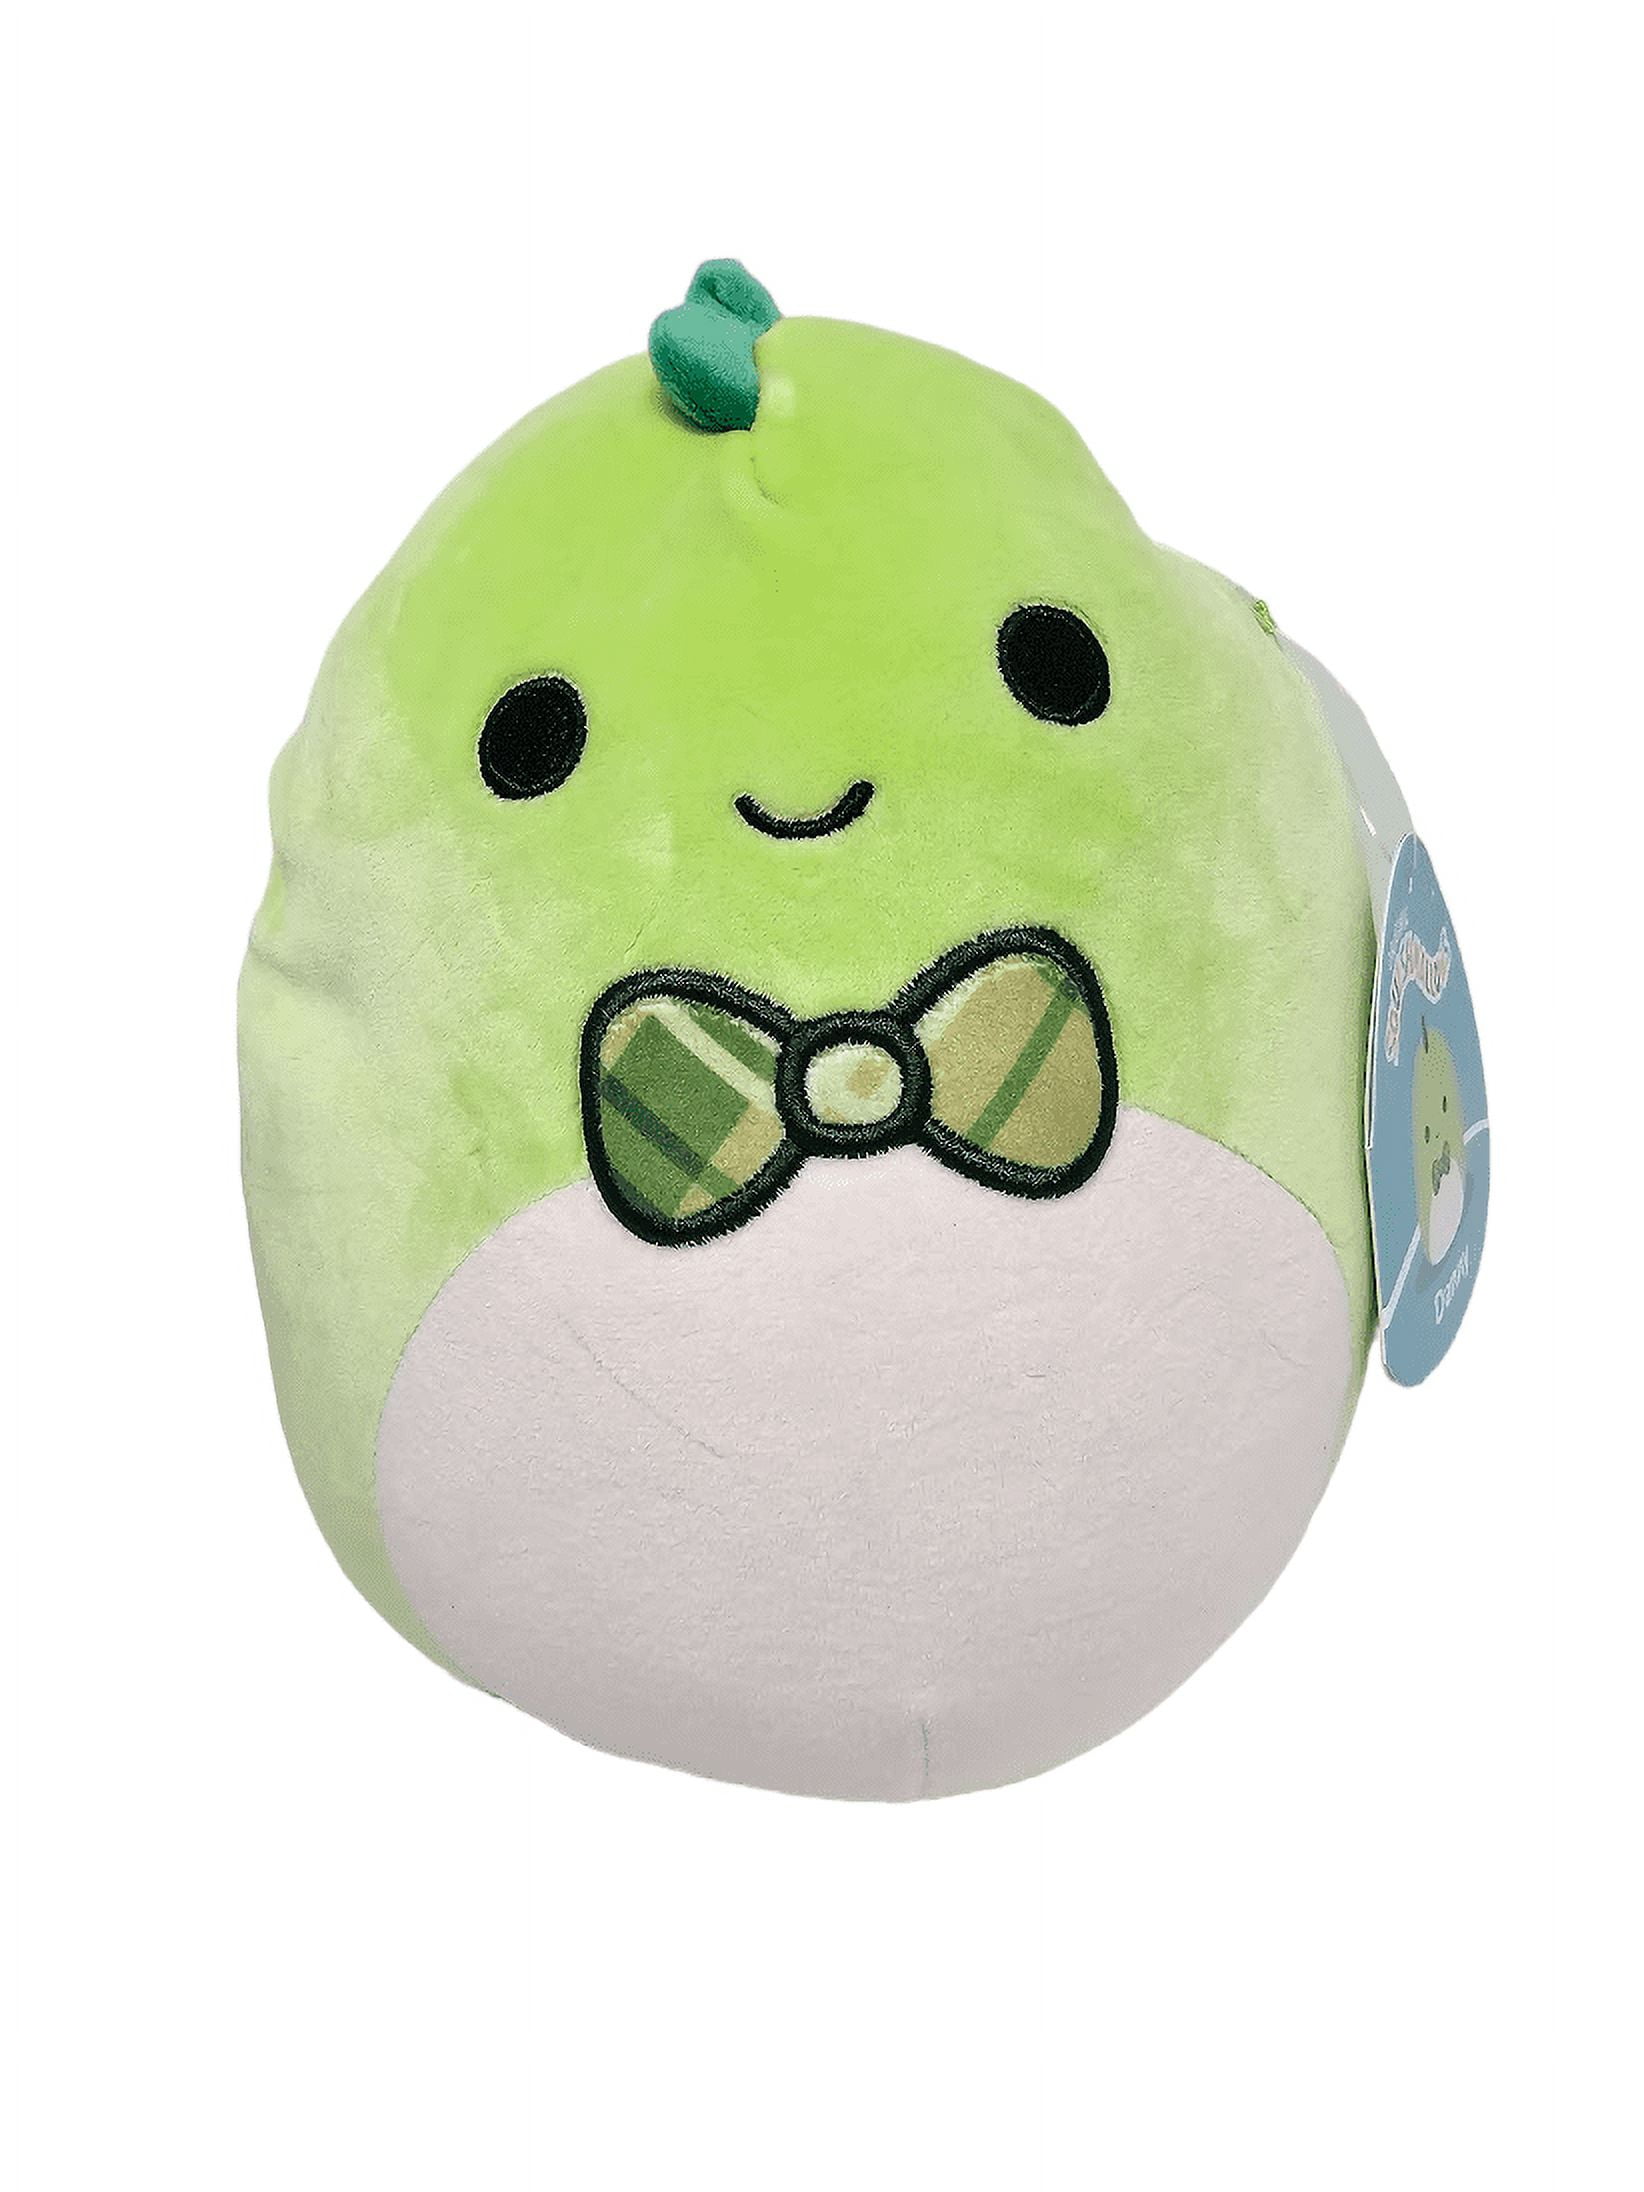 Squishmallow Official Kellytoys 8 Inch Danny the Green Dinosaur with Bow  Tie Ultimate Soft Plush Stuffed Toy